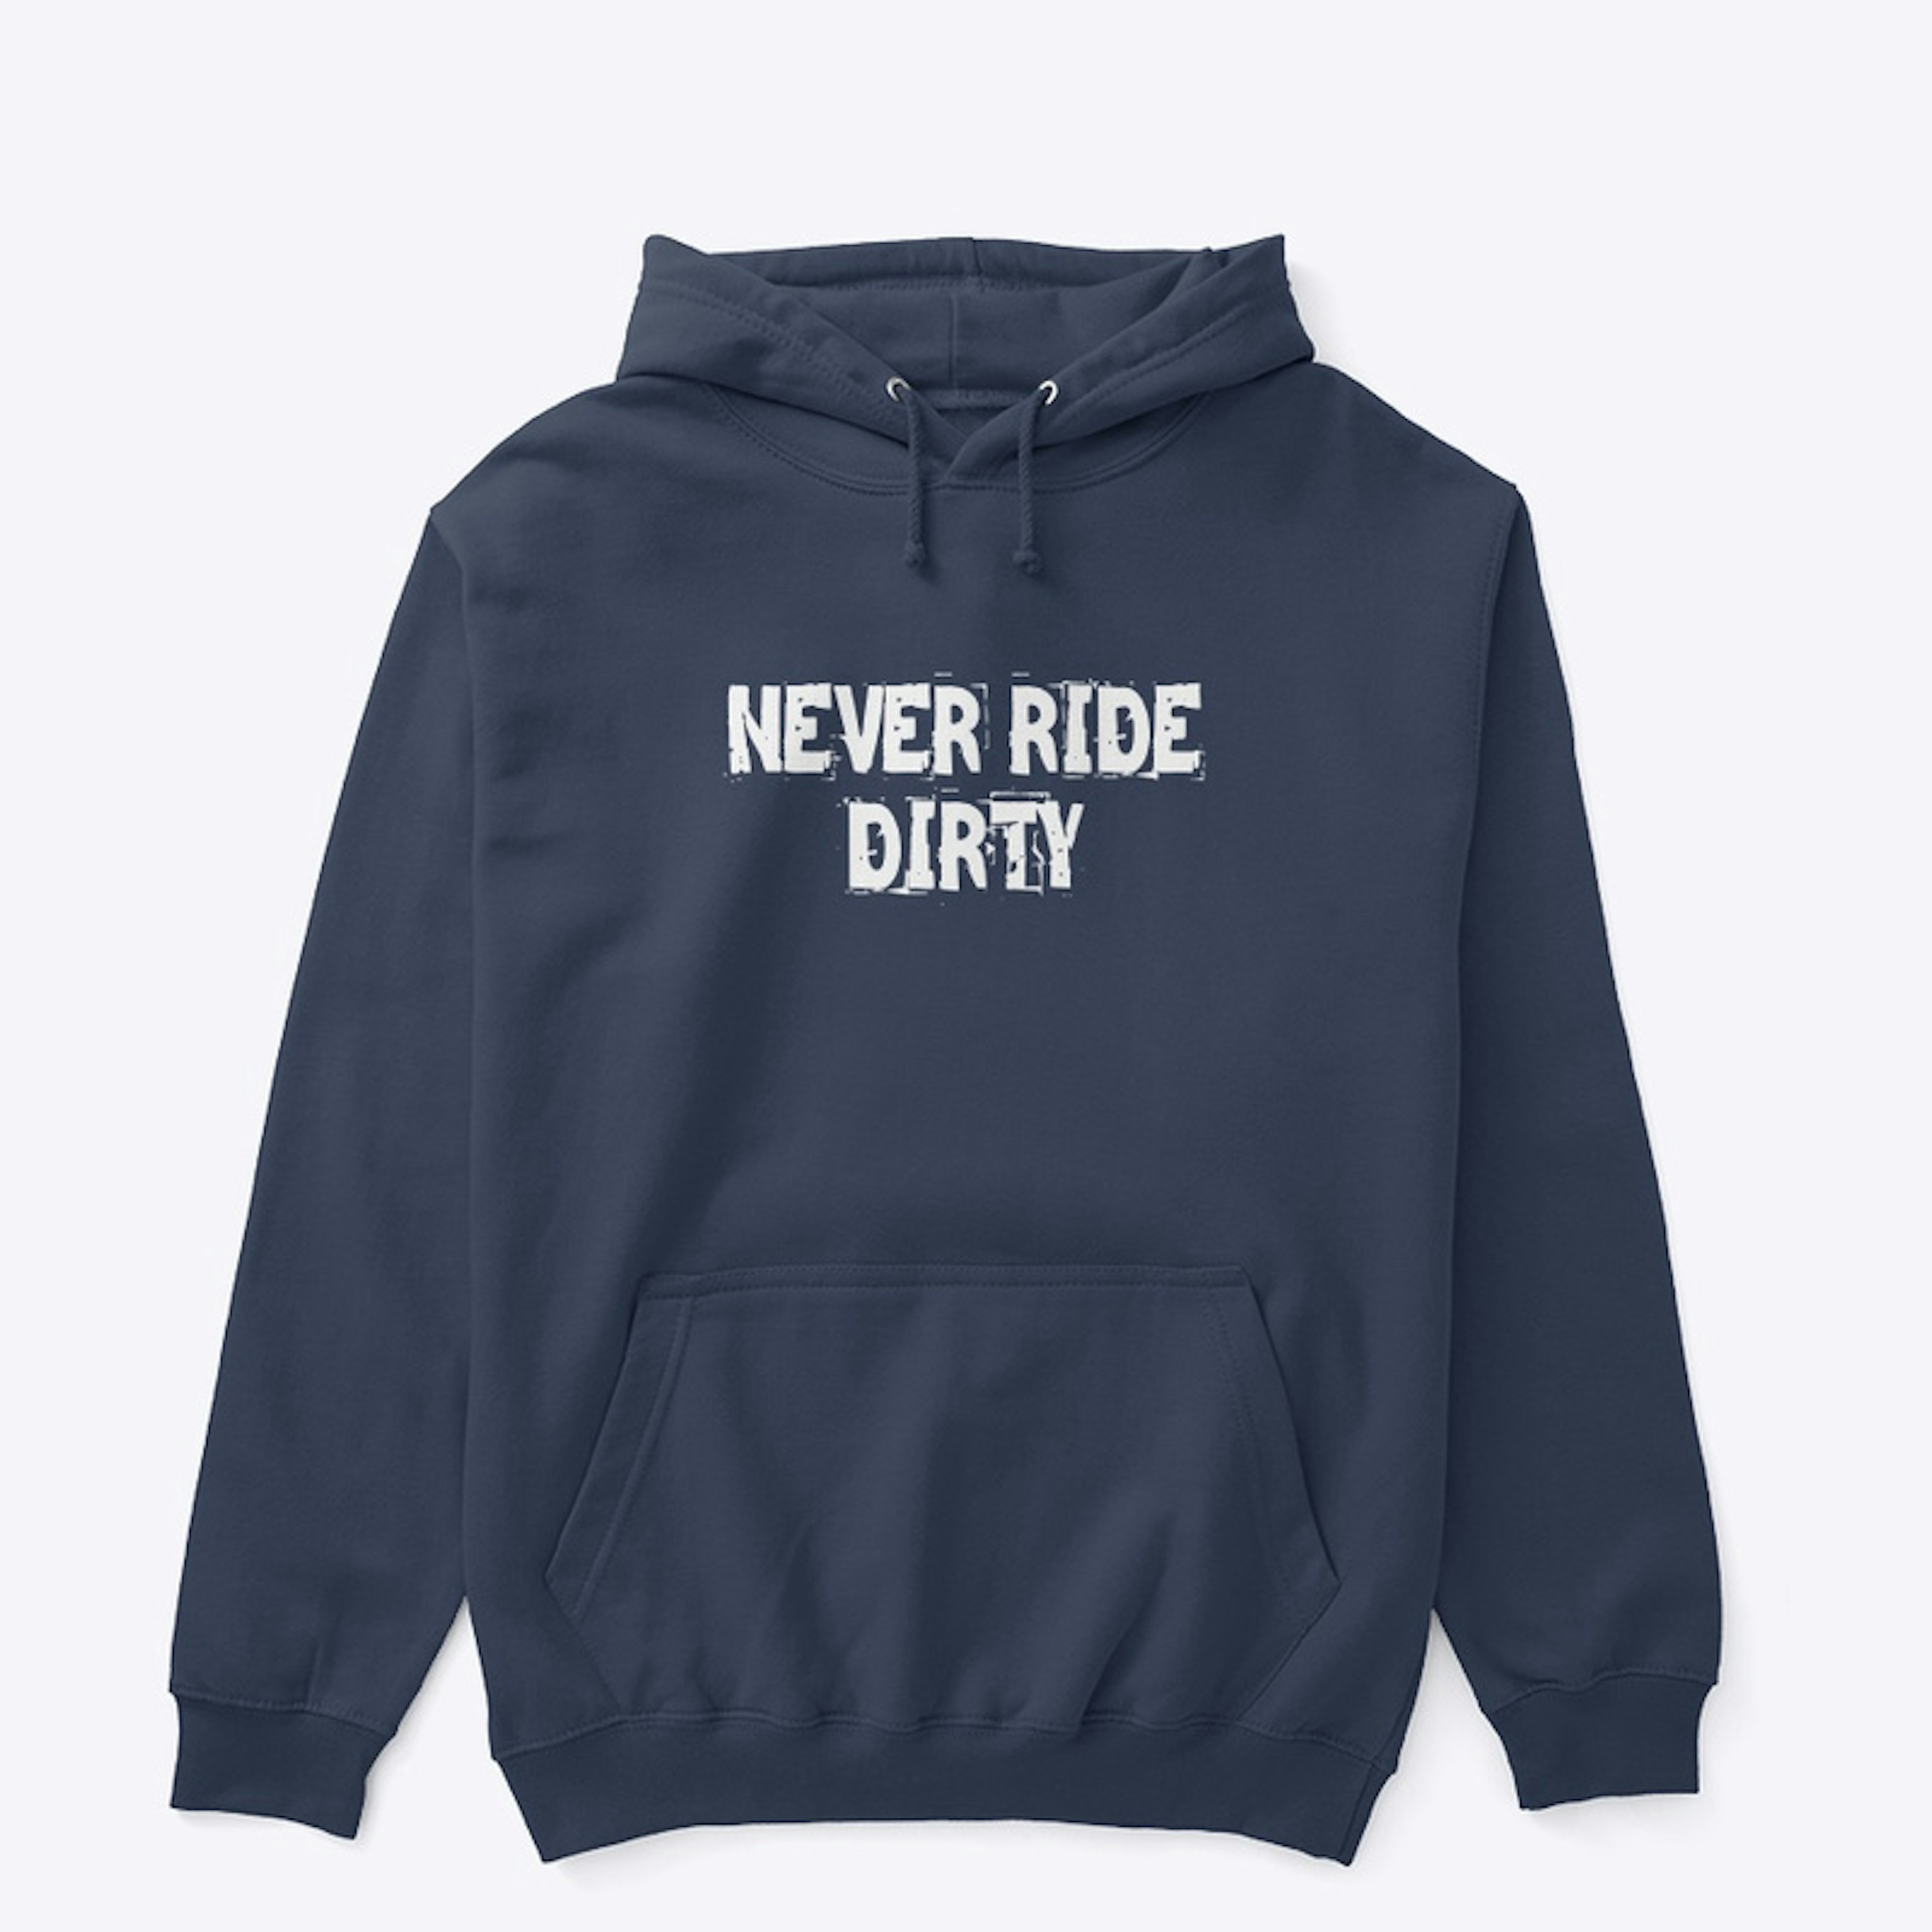 Never Ride Dirty!